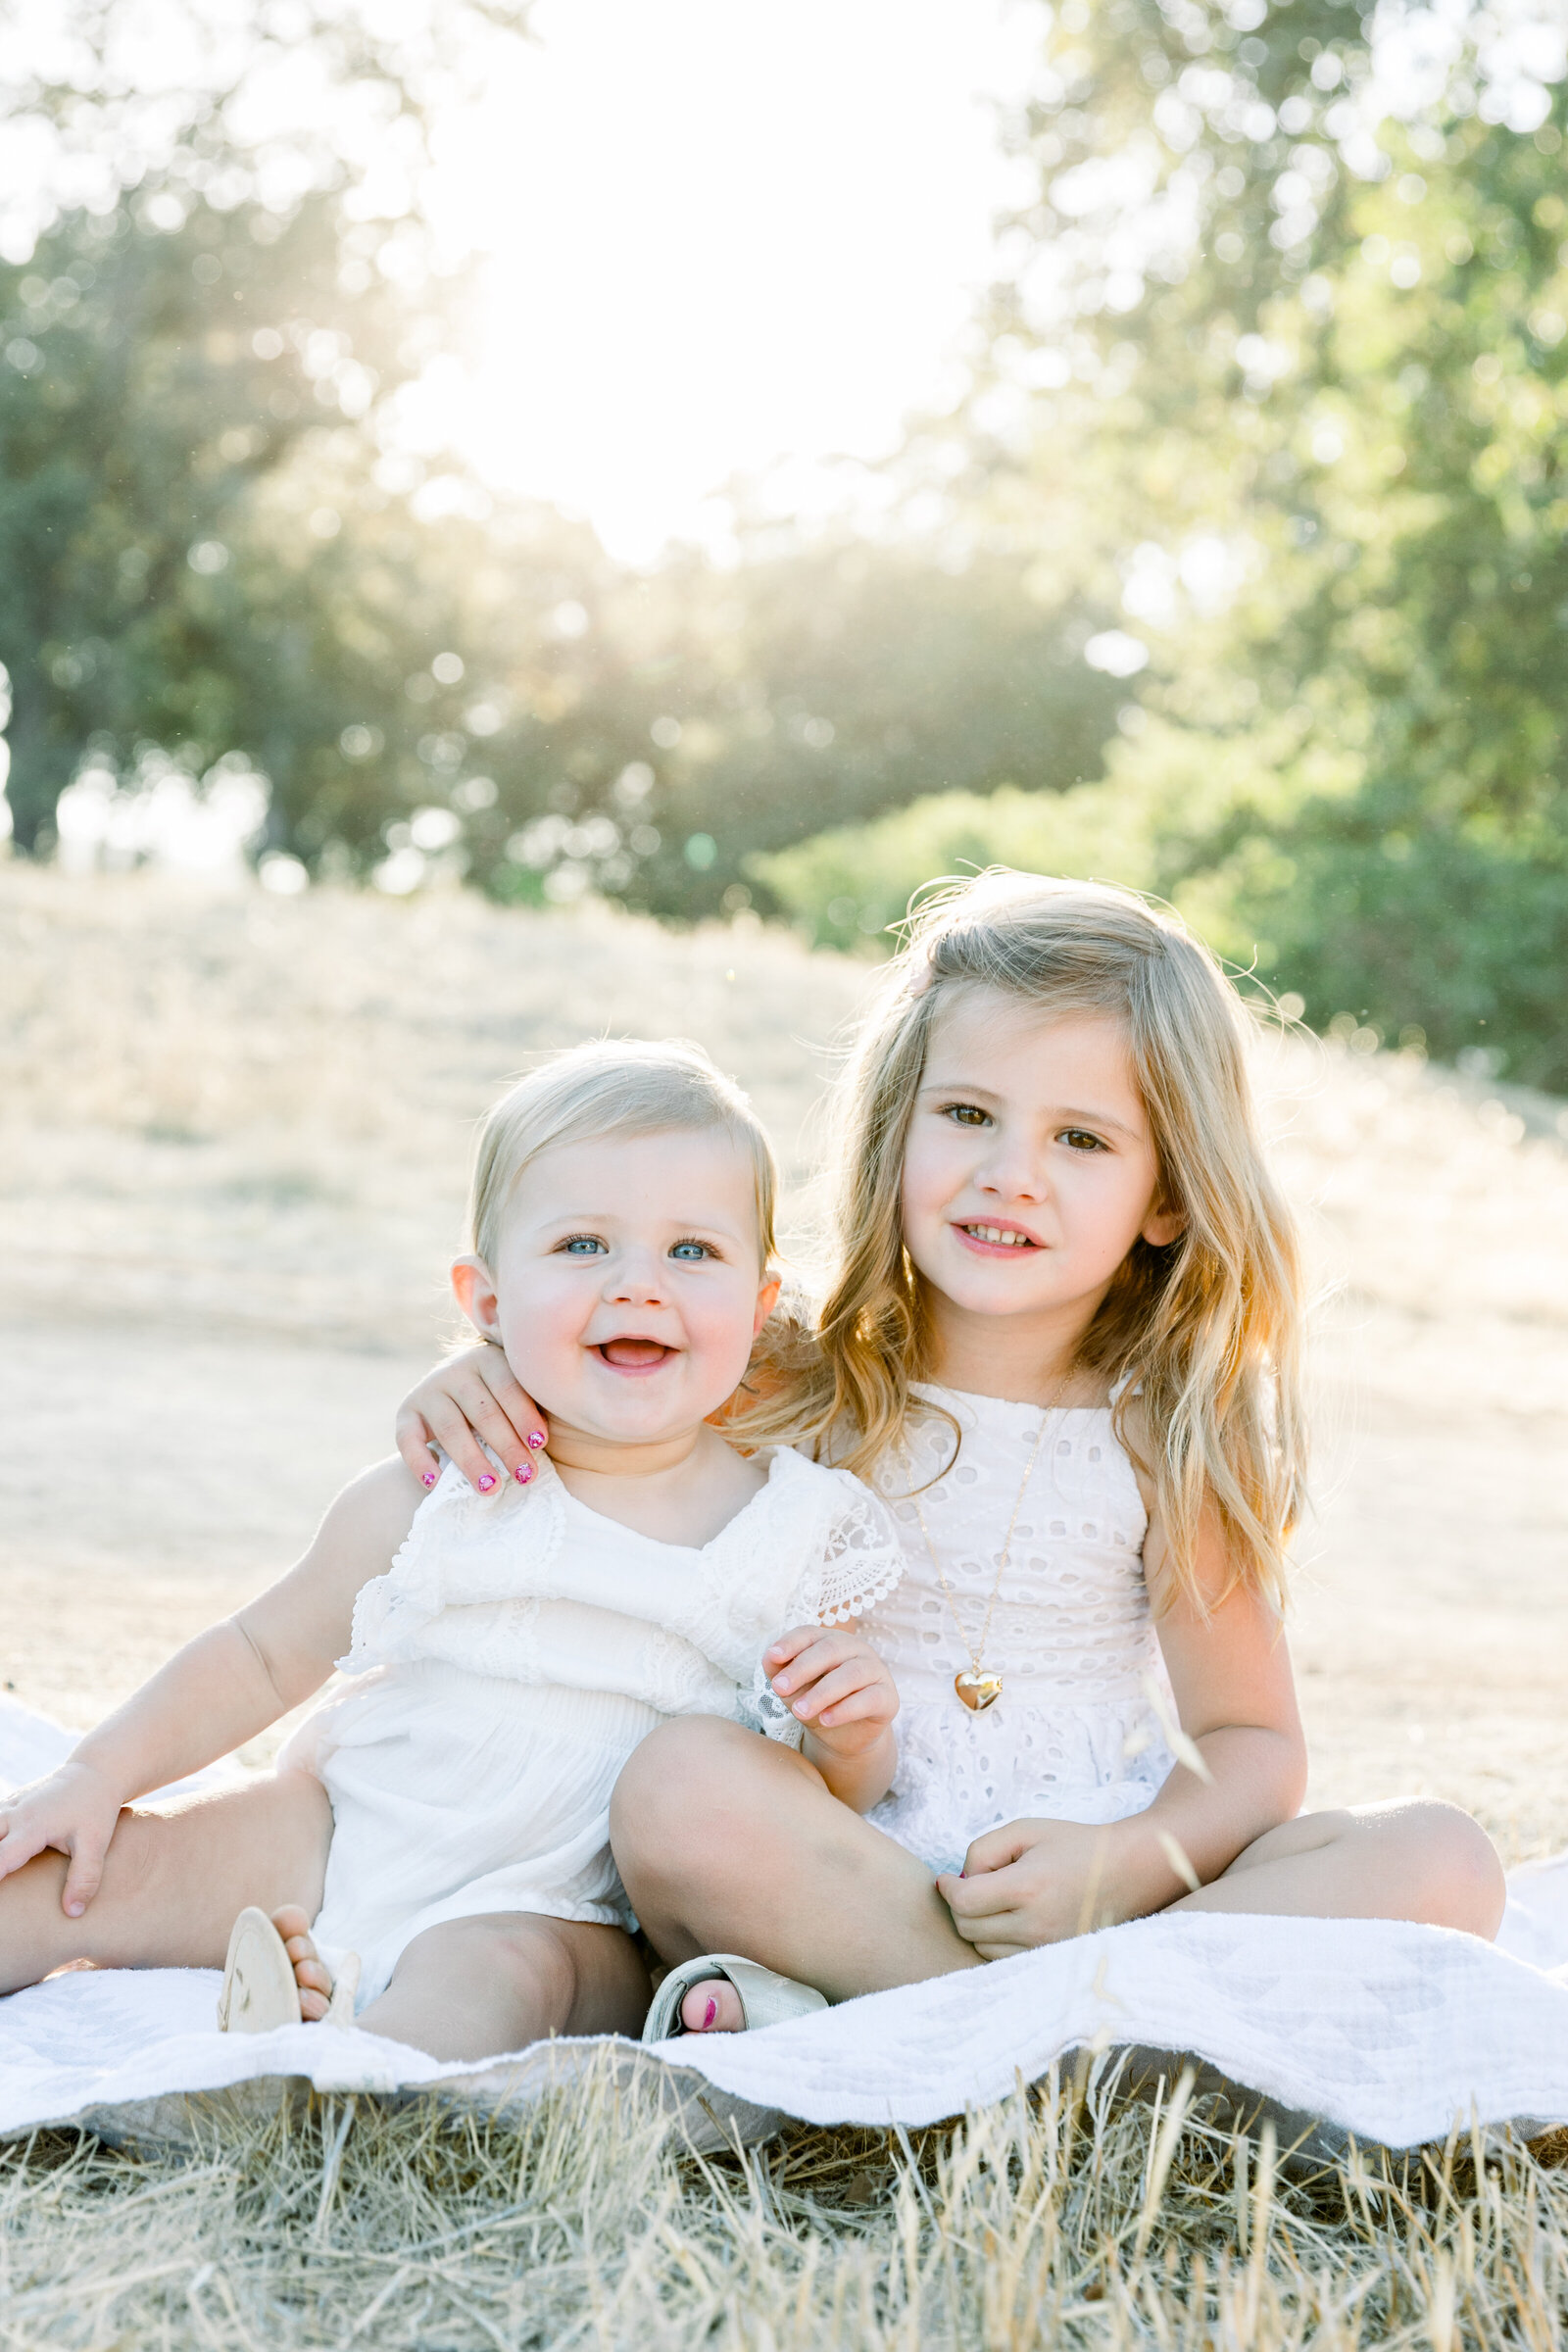 Image of two sisters sitting on blanket in a field together smiling taken by Sacramento Newborn Photographer Kelsey Krall